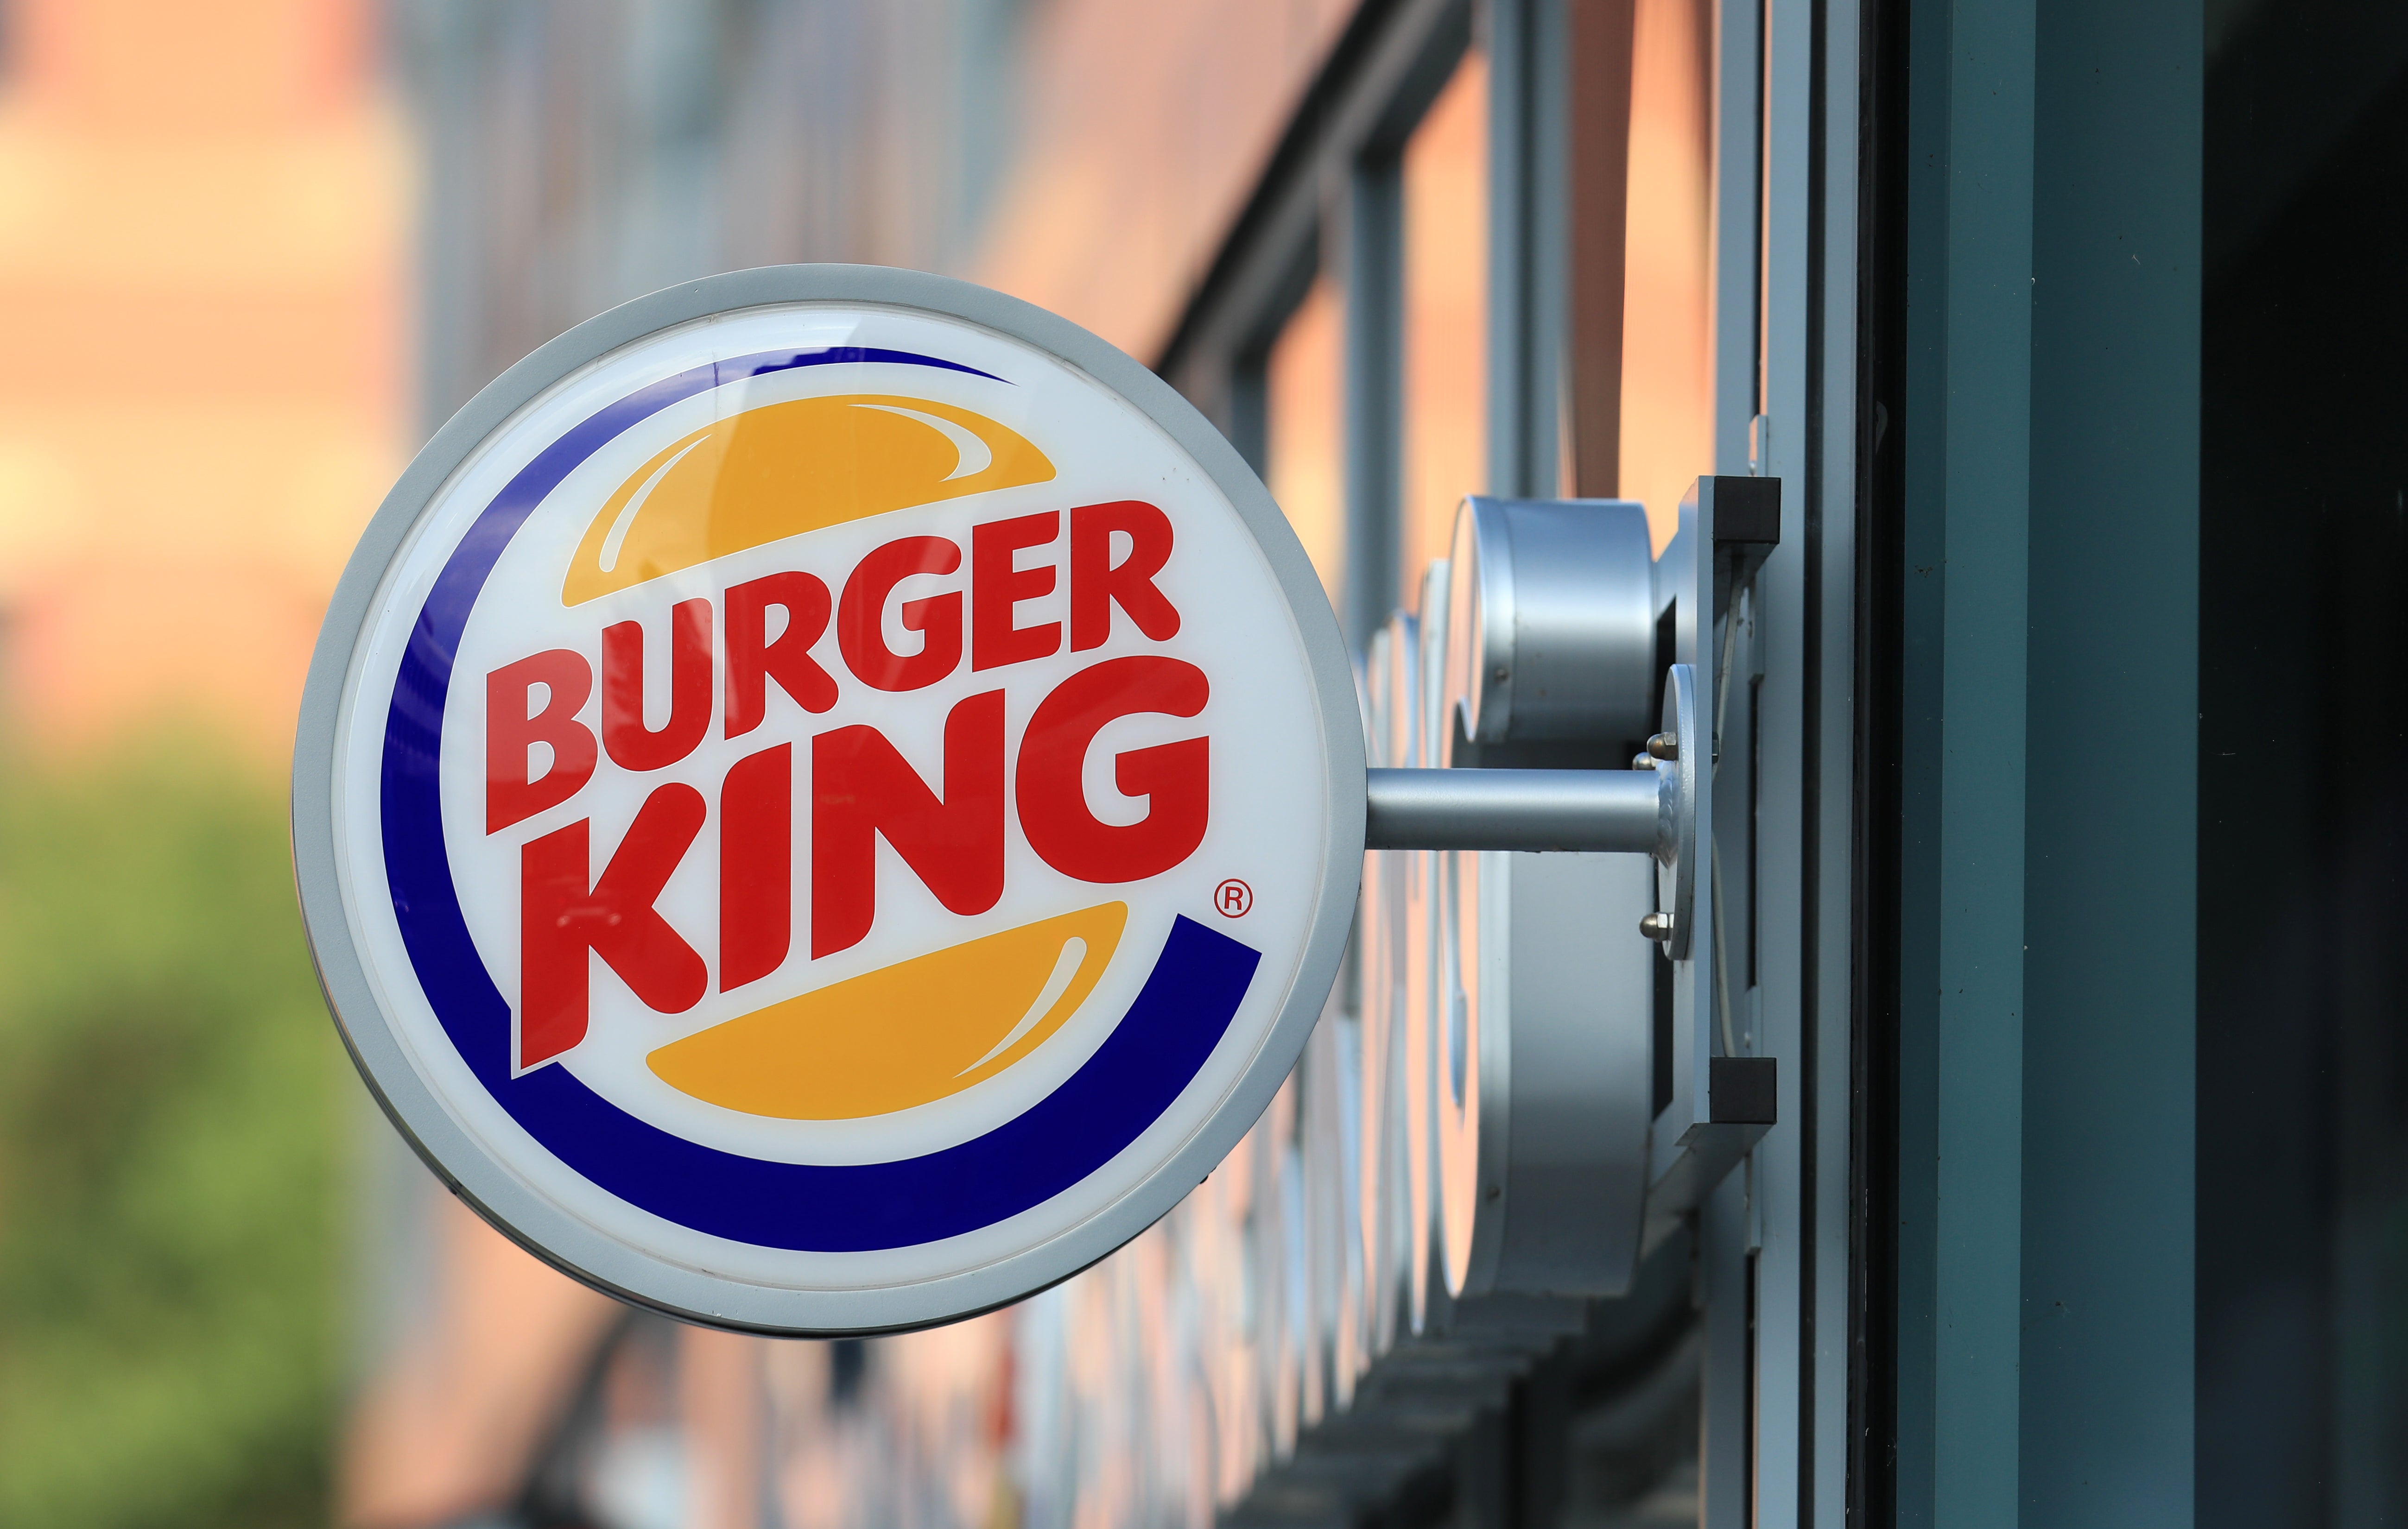 Burger King UK said it plans to open 200 new restaurants by 2026 (Mike Egerton/PA)